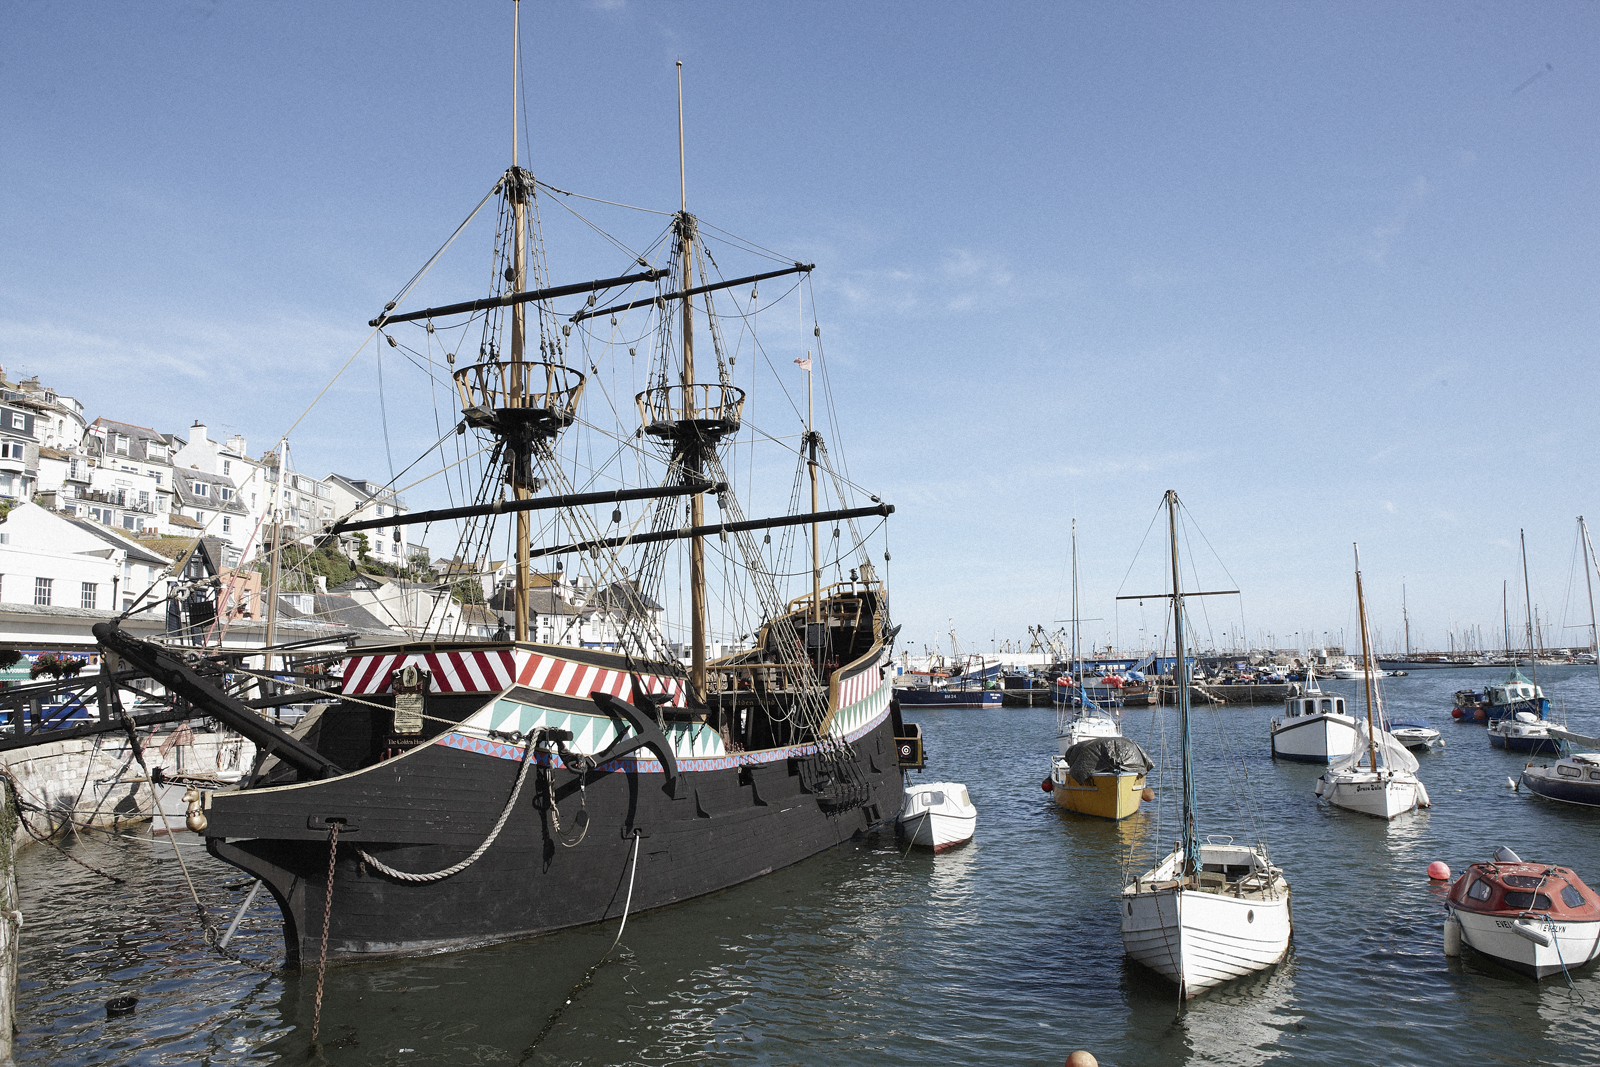 The Golden Hind in Brixham harbour, the main attraction for couples on short breaks in this south Devon port.